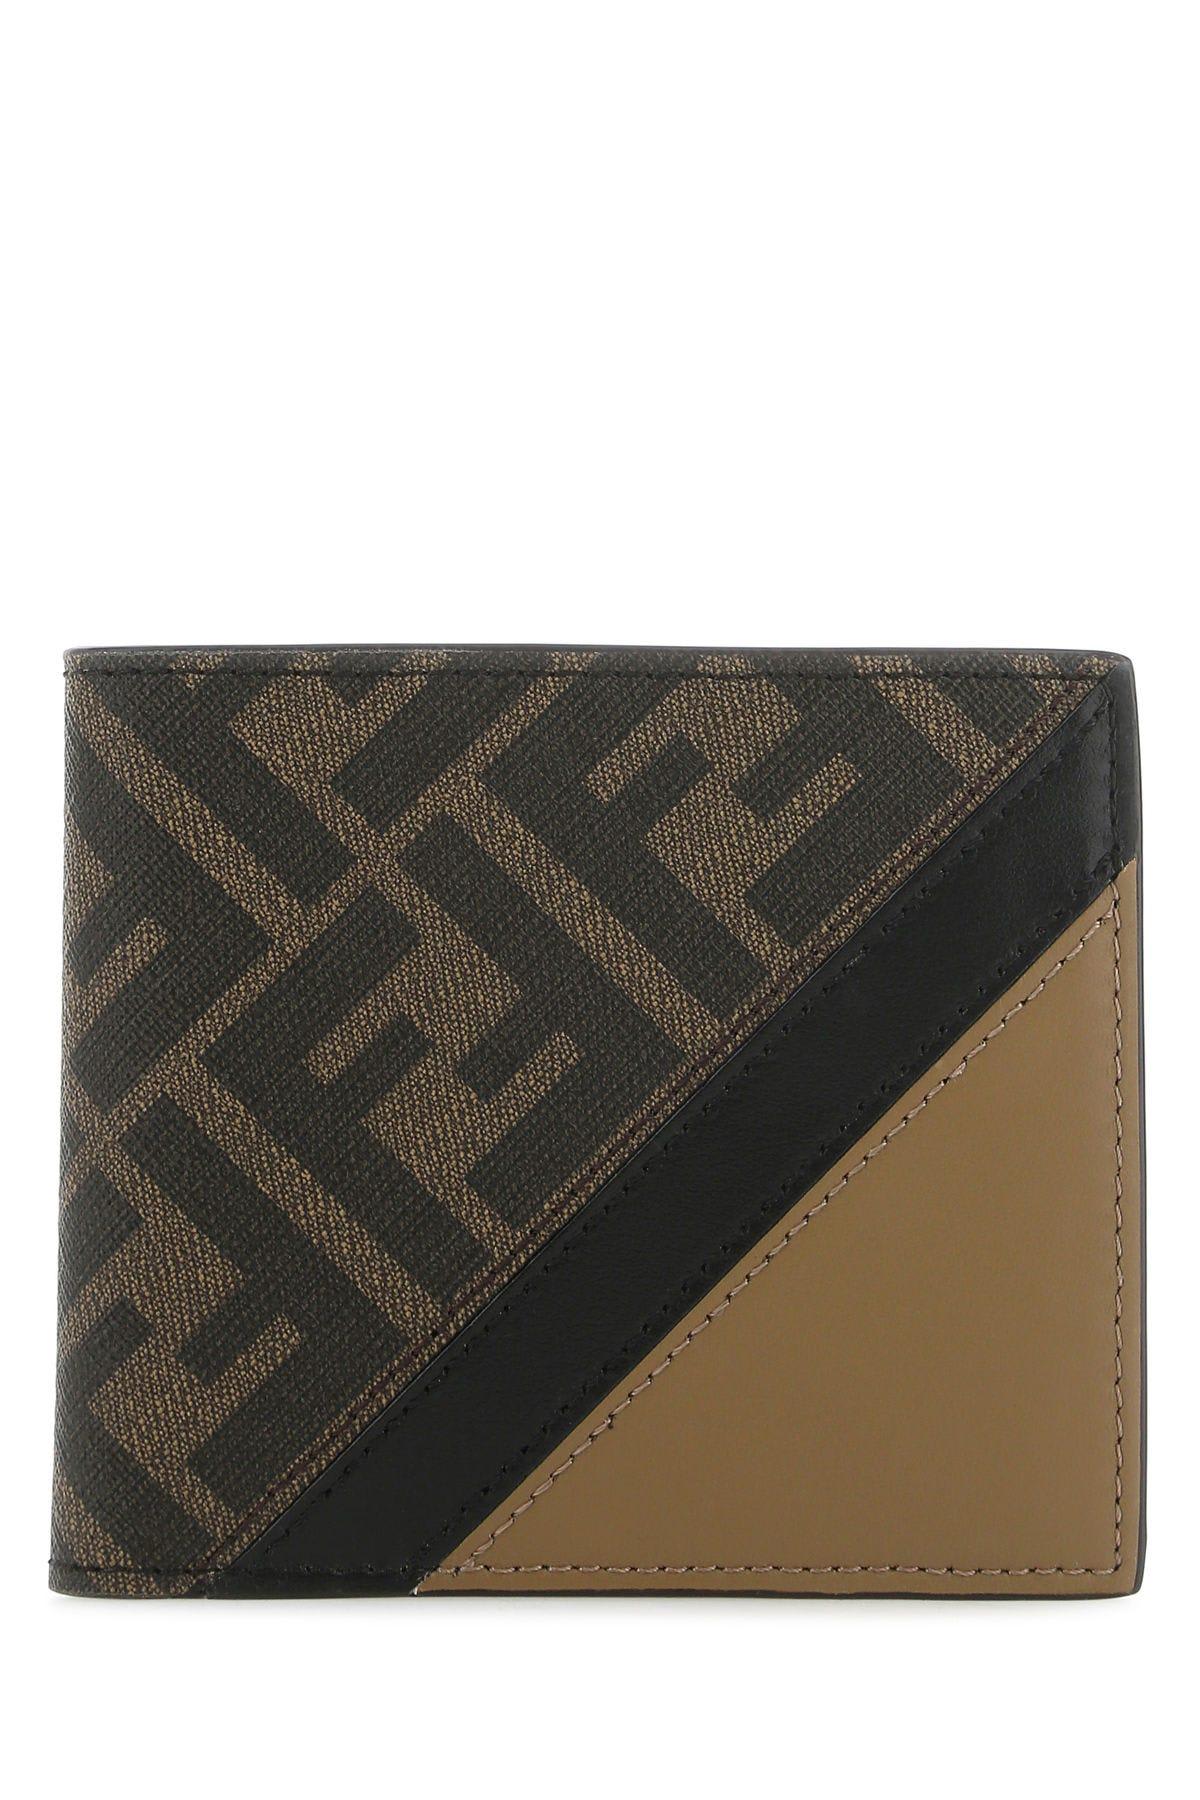 Fendi Multicolor Fabric And Leather Wallet